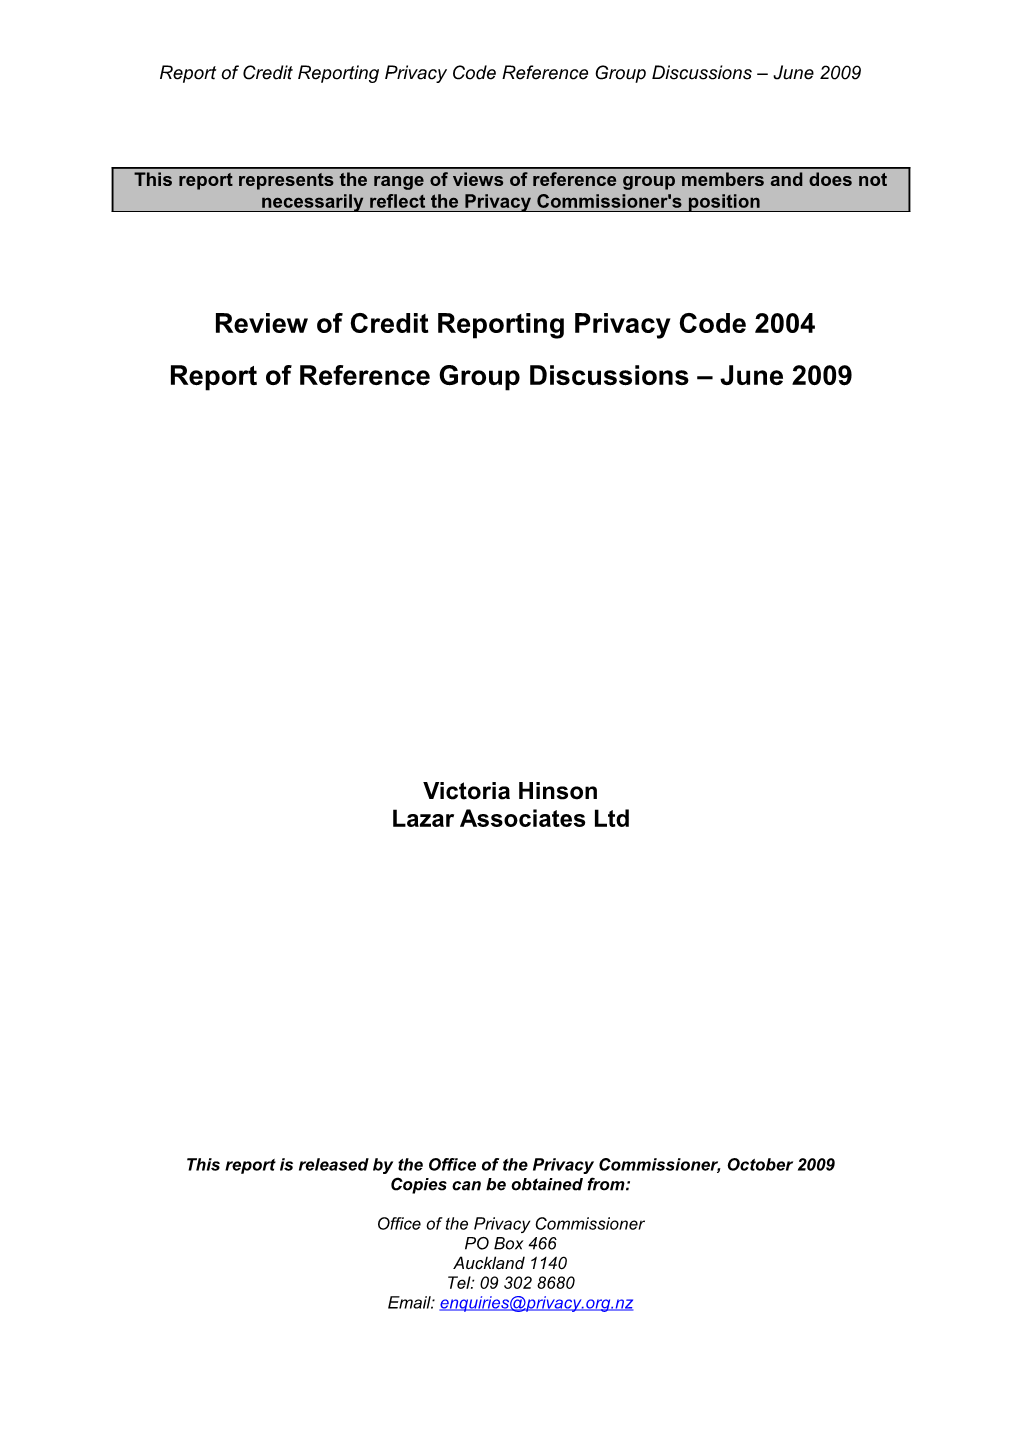 Review of Credit Reporting Privacy Code 2004